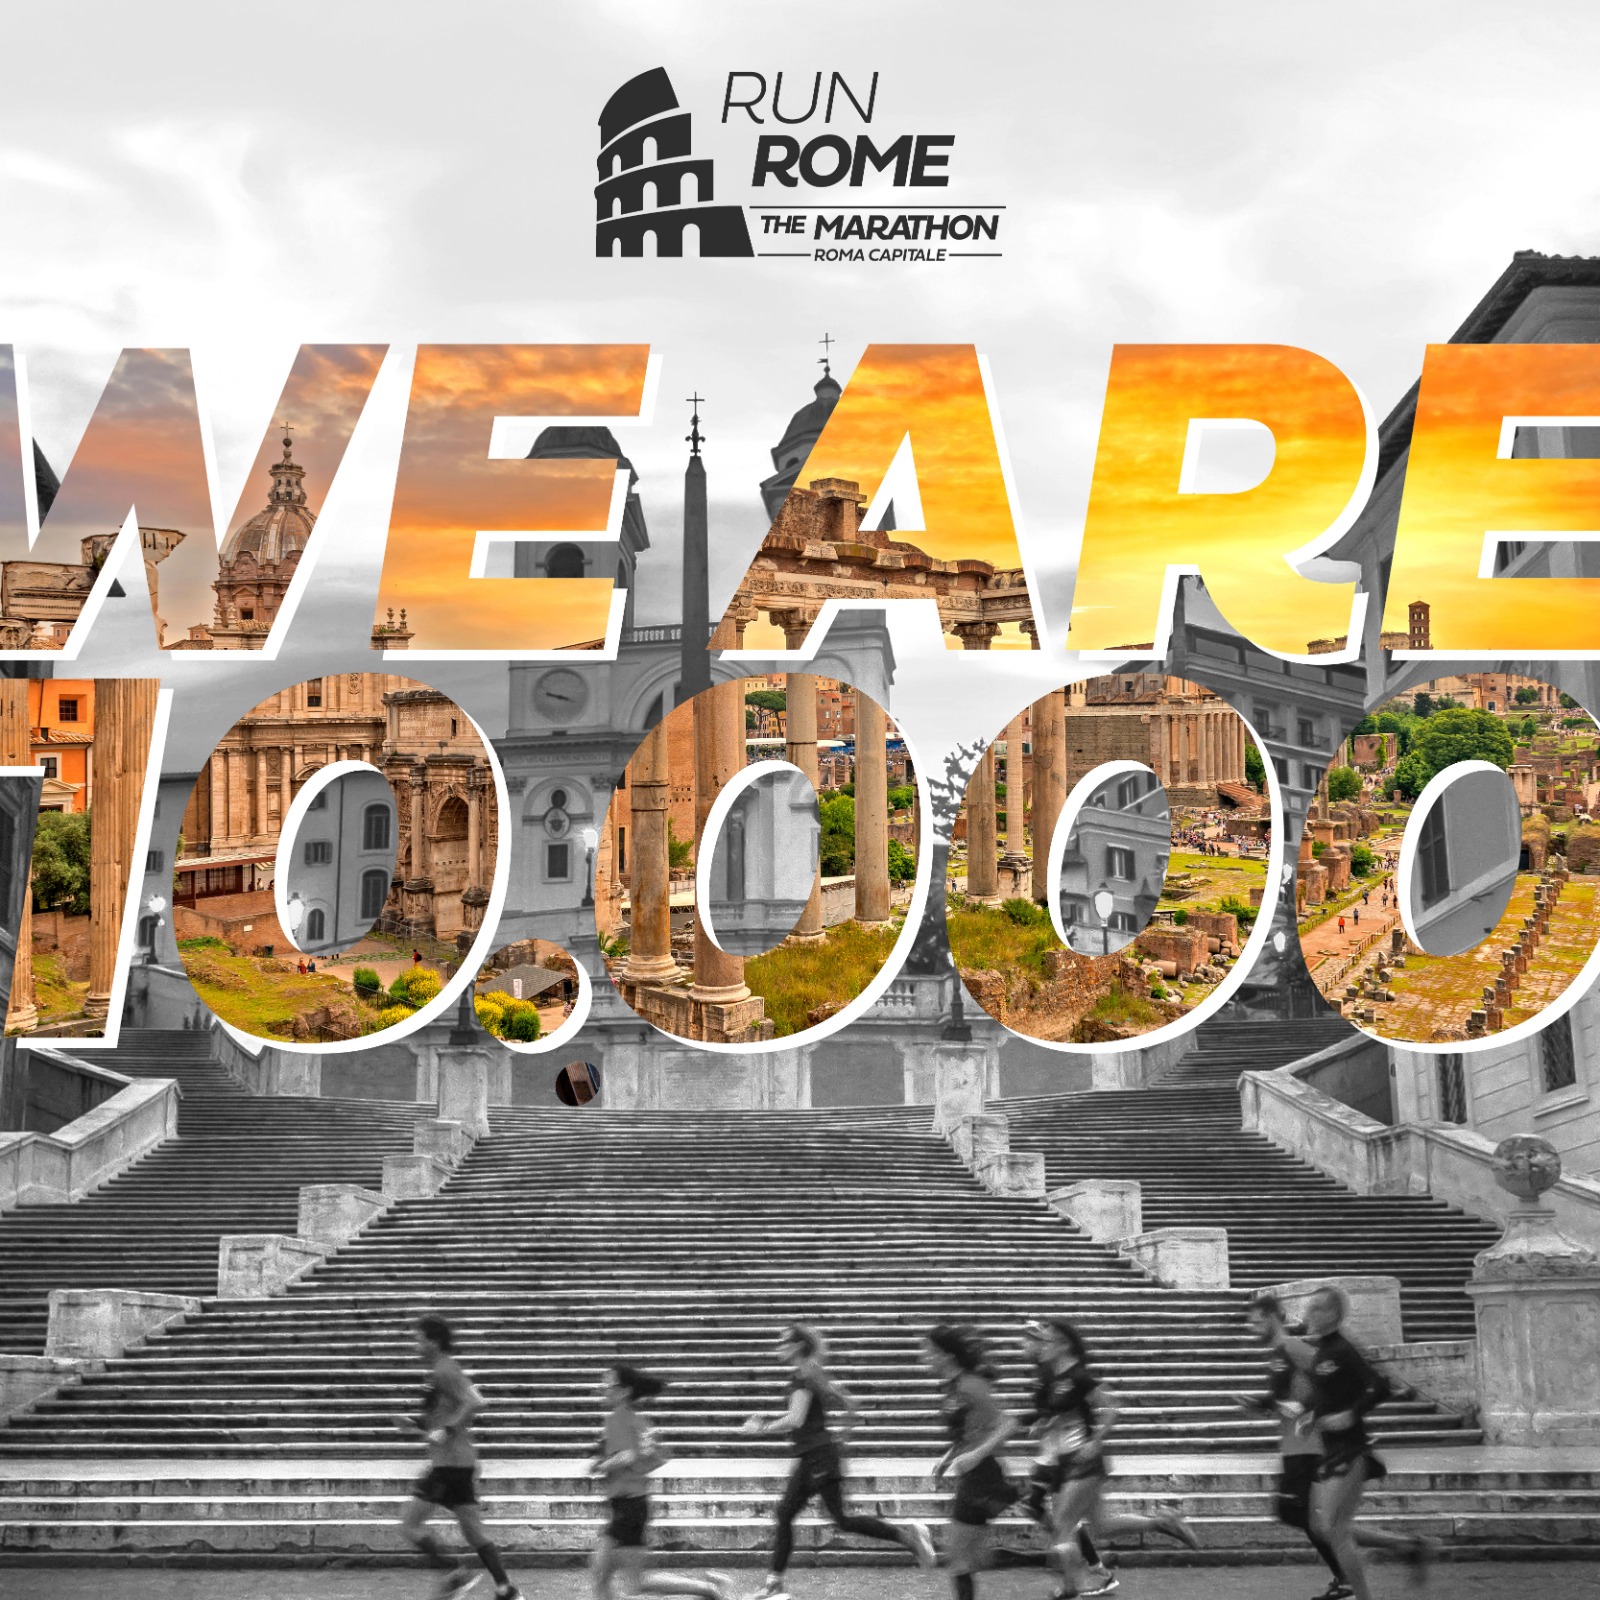 Already 10,000 participants have registered for Run Rome The Marathon, Rome is worth a trip